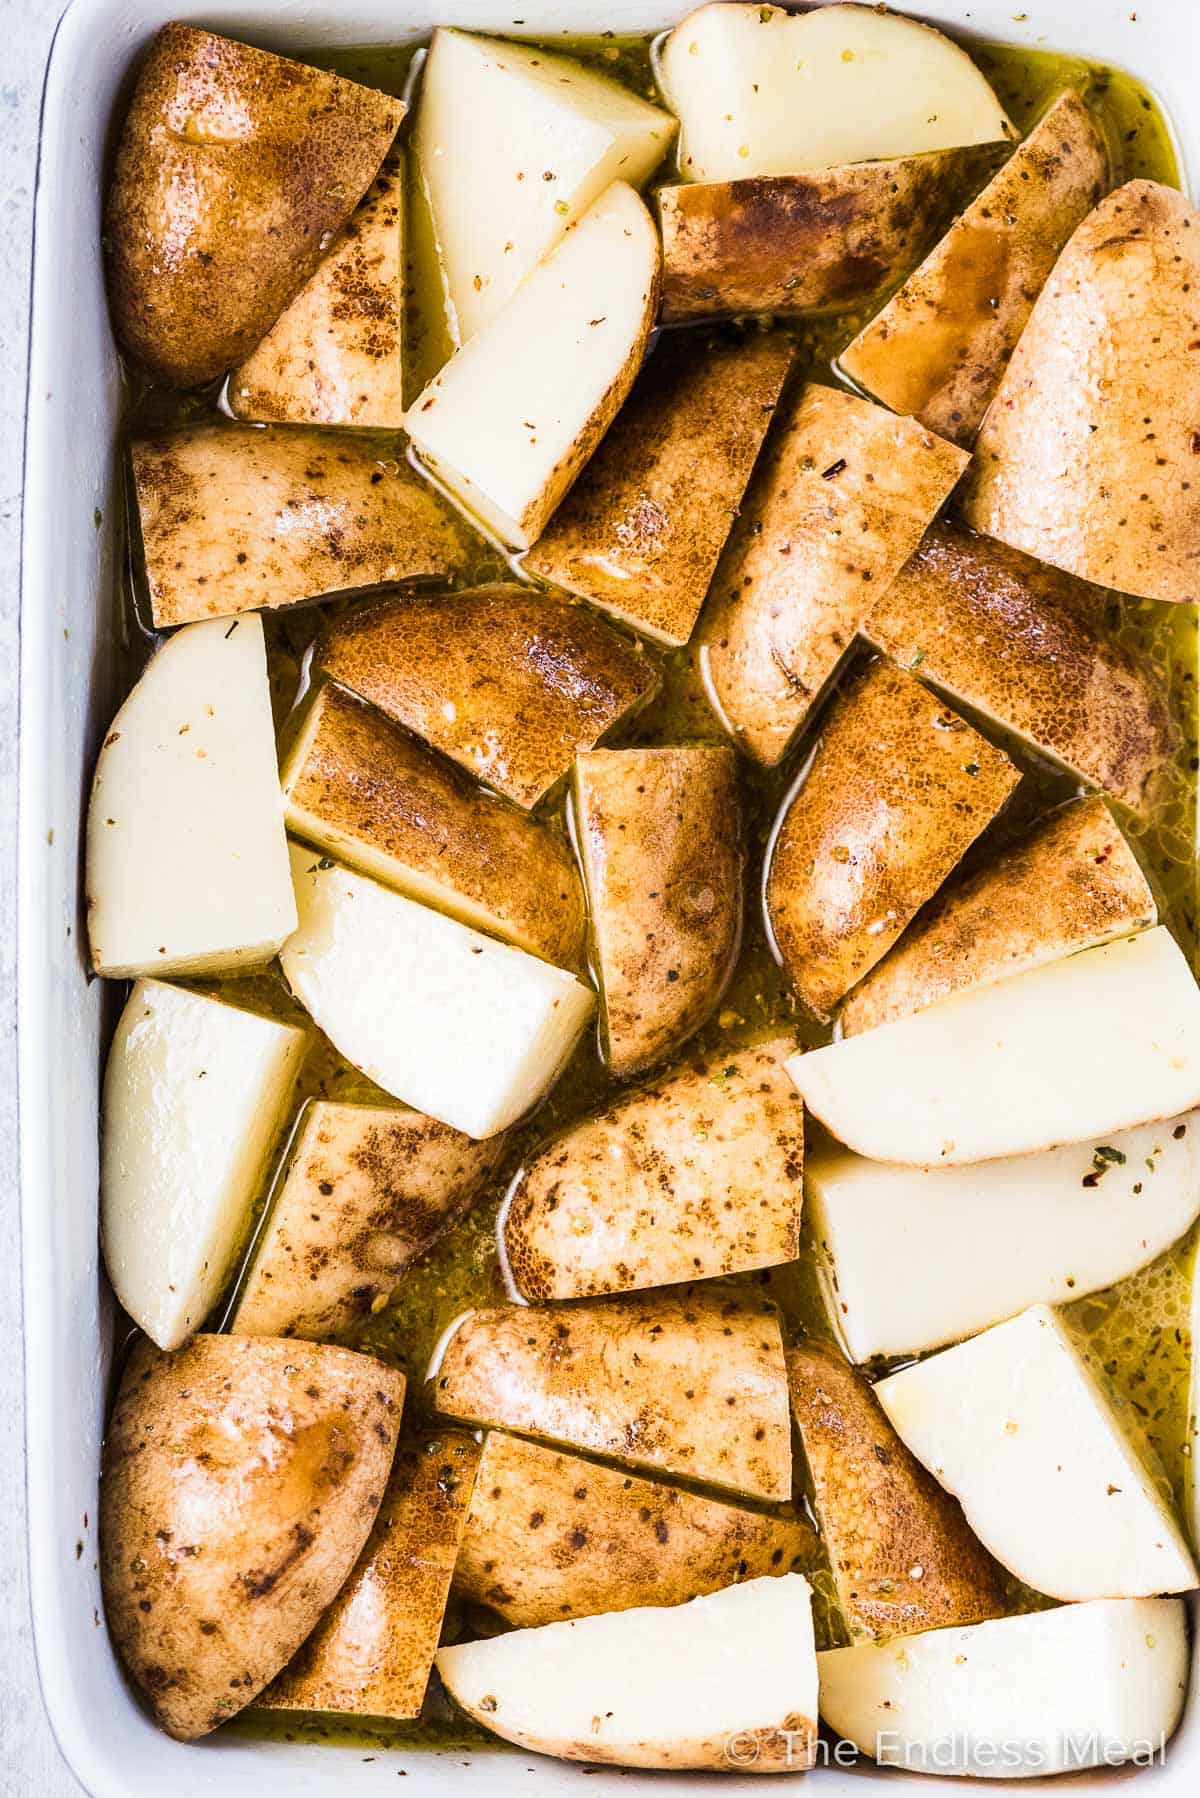 Lemon potatoes in a roasting pan before going into the oven.